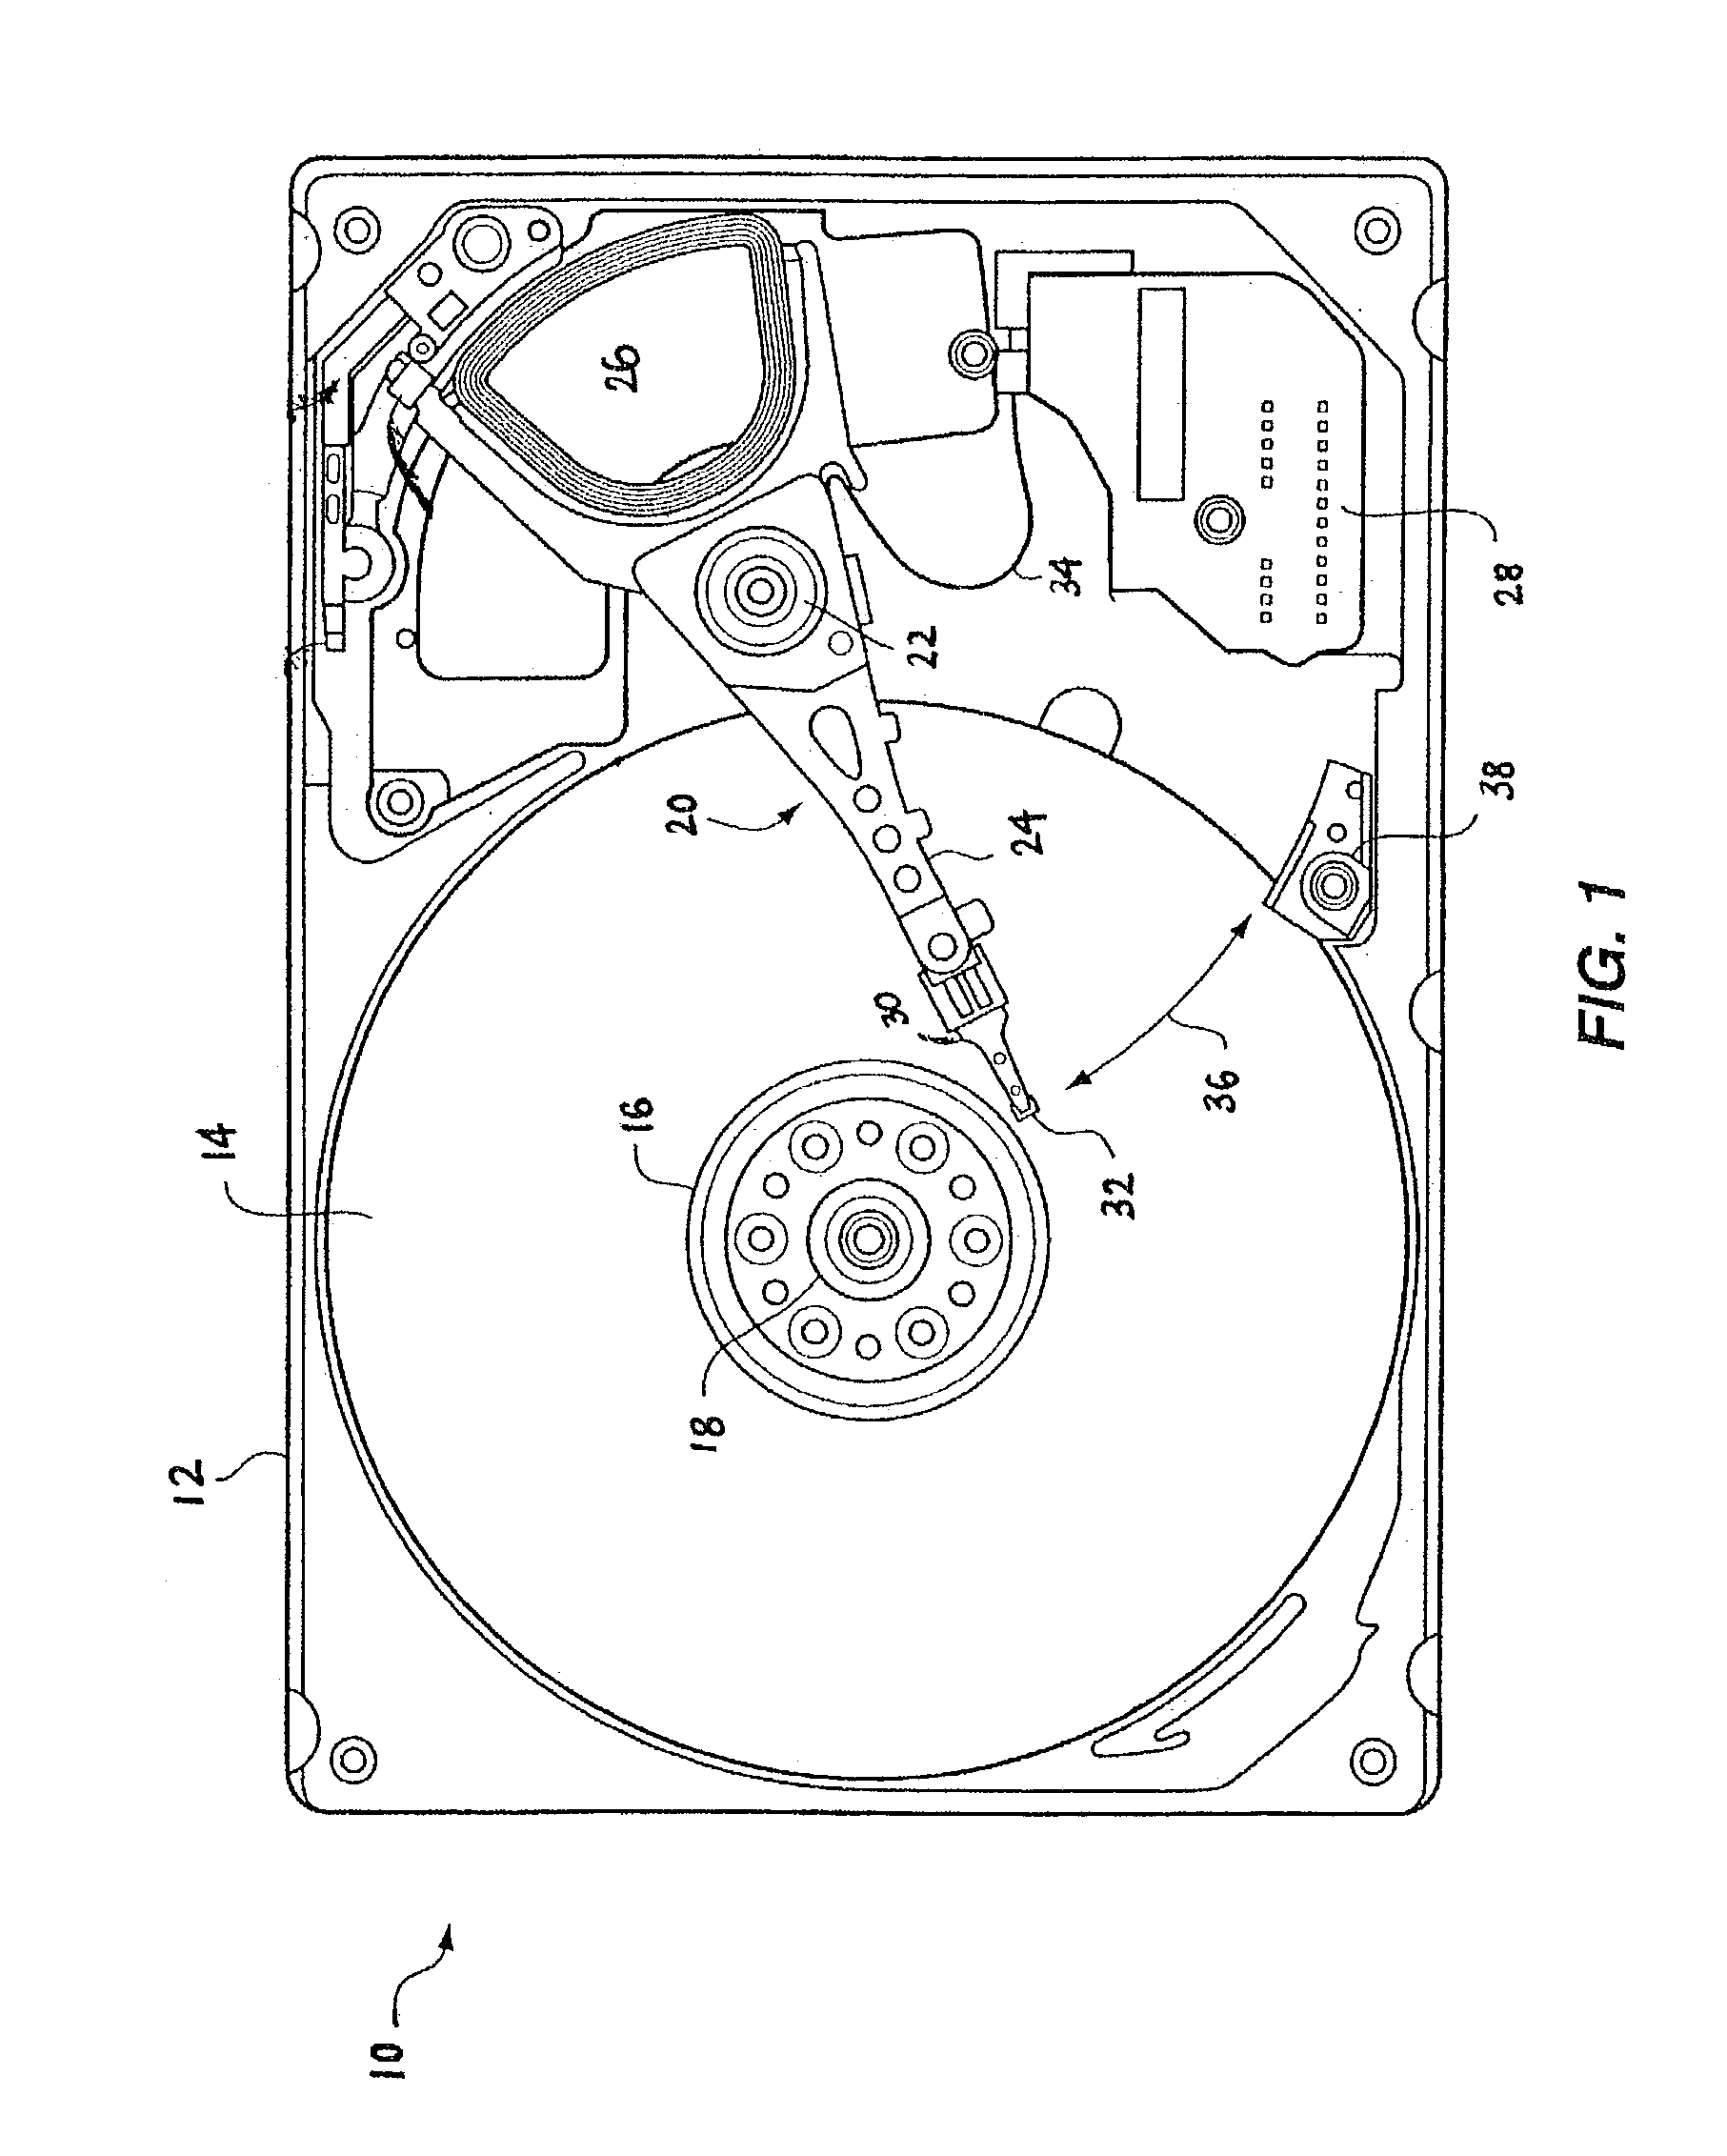 Method for reducing pole and alumina recession on magnetic recording heads